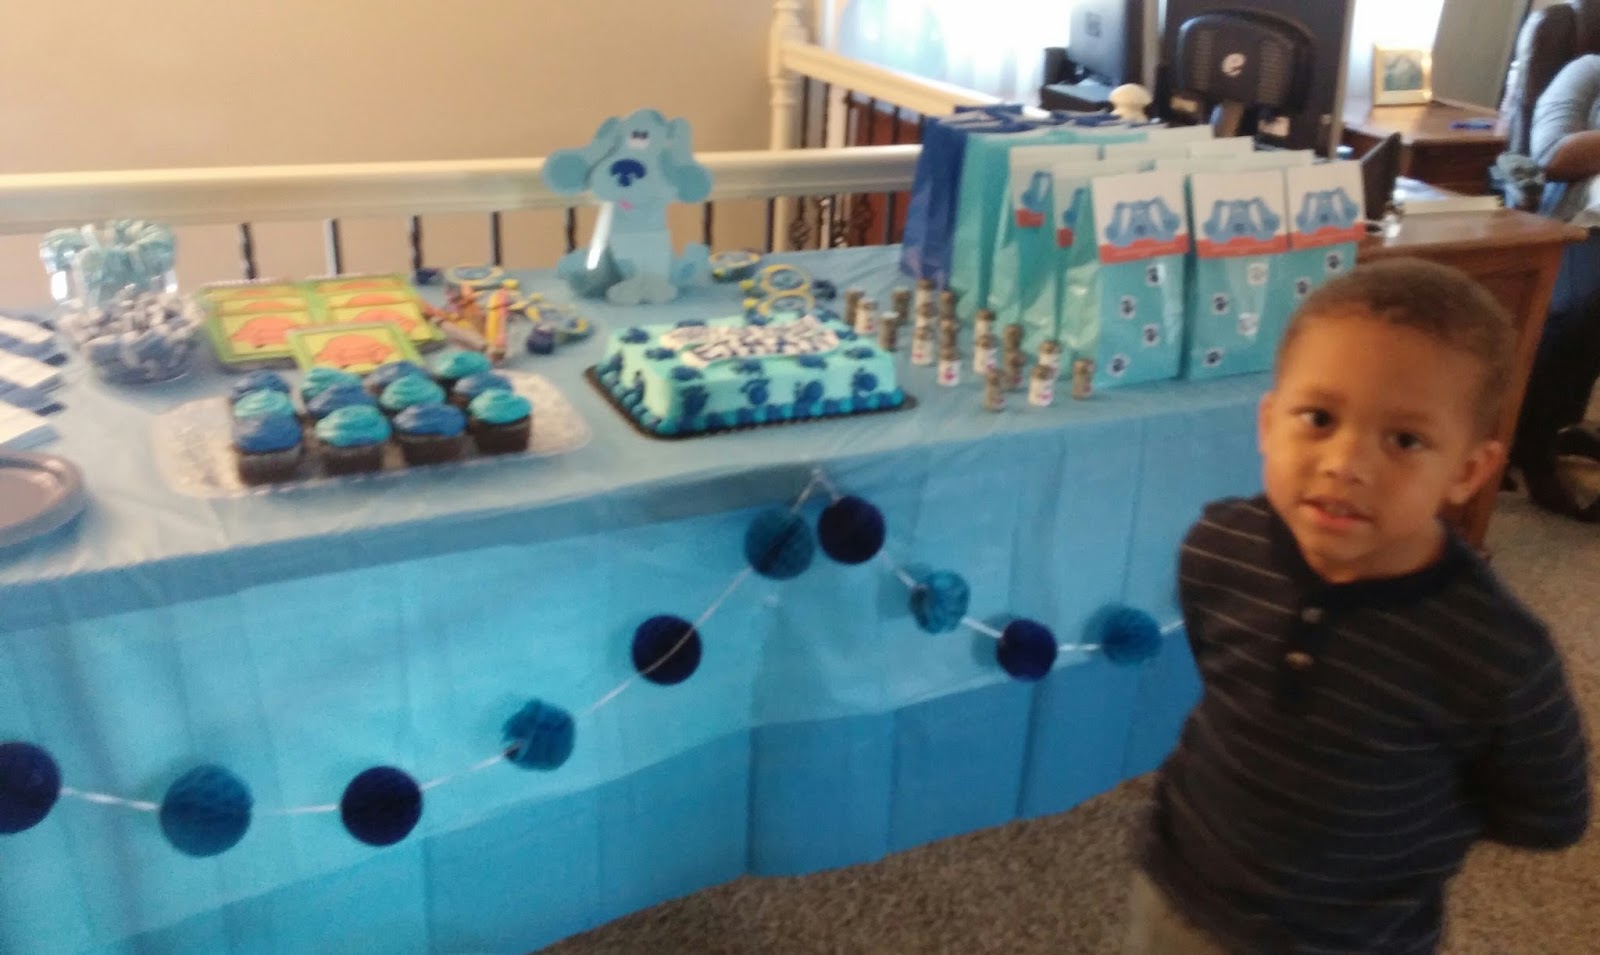 Budget-Friendly Blue's Clues Party Ideas for a Blue's Clues & You